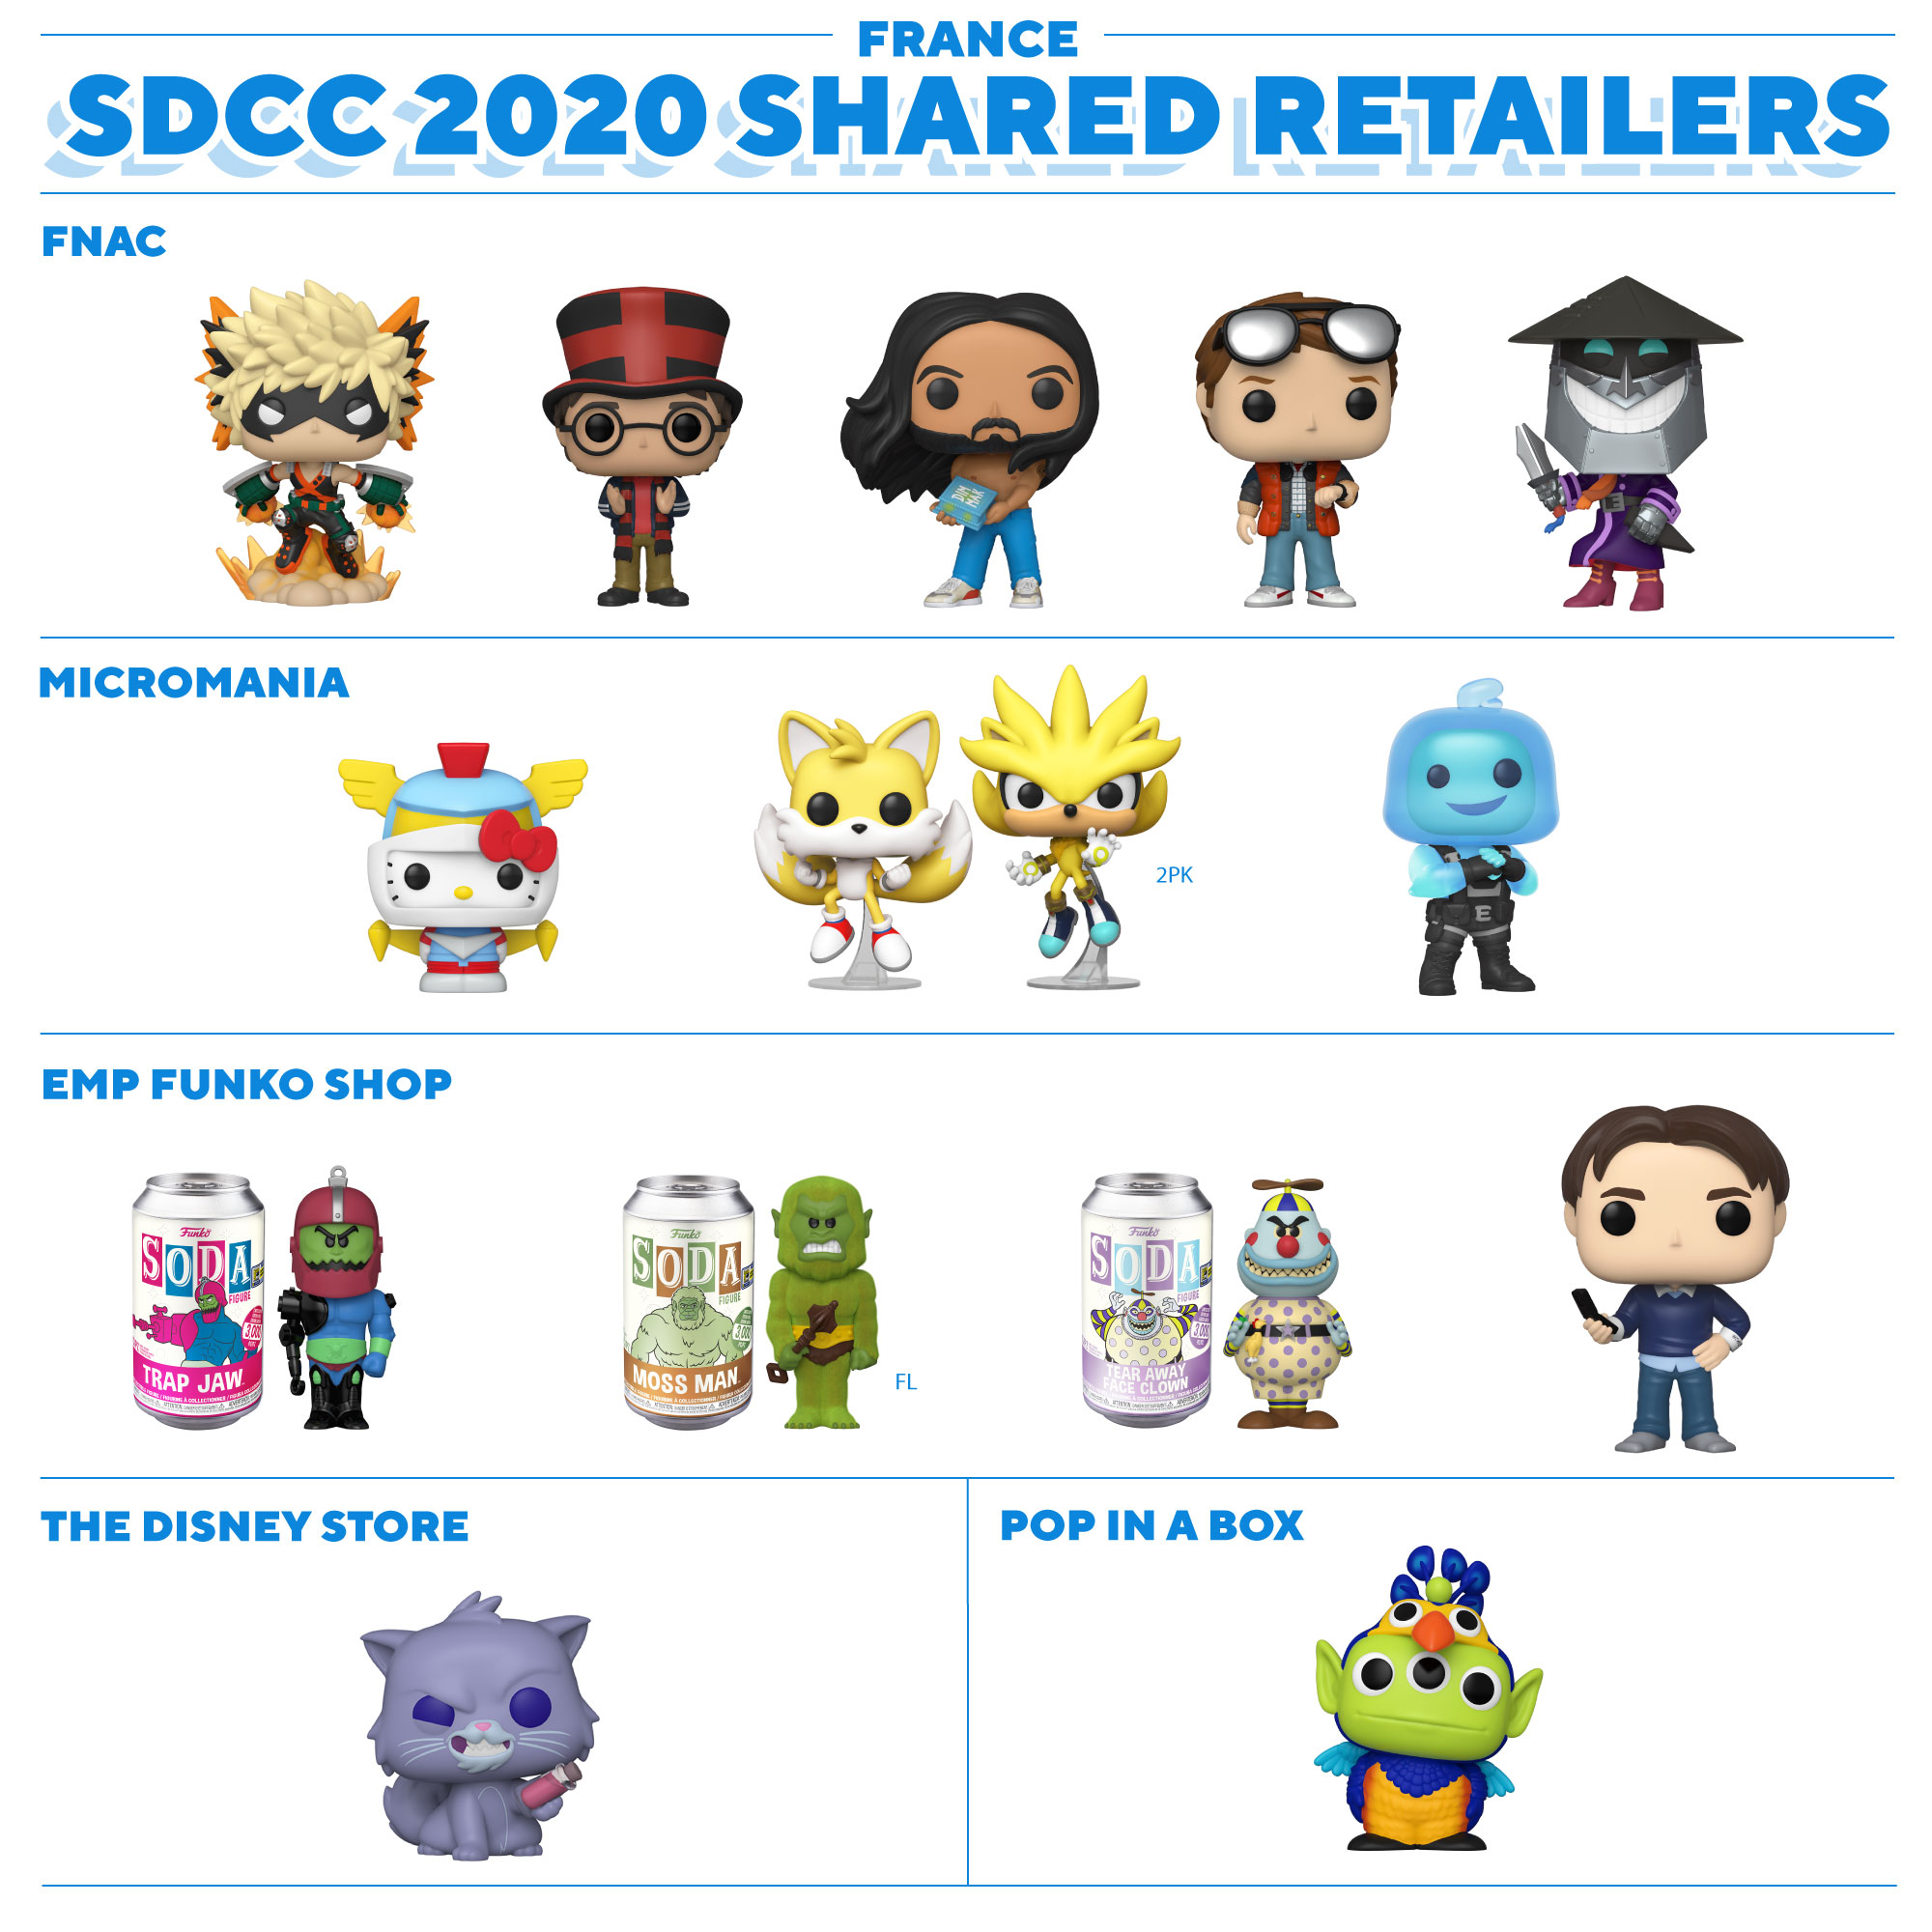 Funko Europe on Twitter: "👀Thread👀 Here's our list of SDCC exclusive shared retailers for &amp; Europe! 👇" Twitter